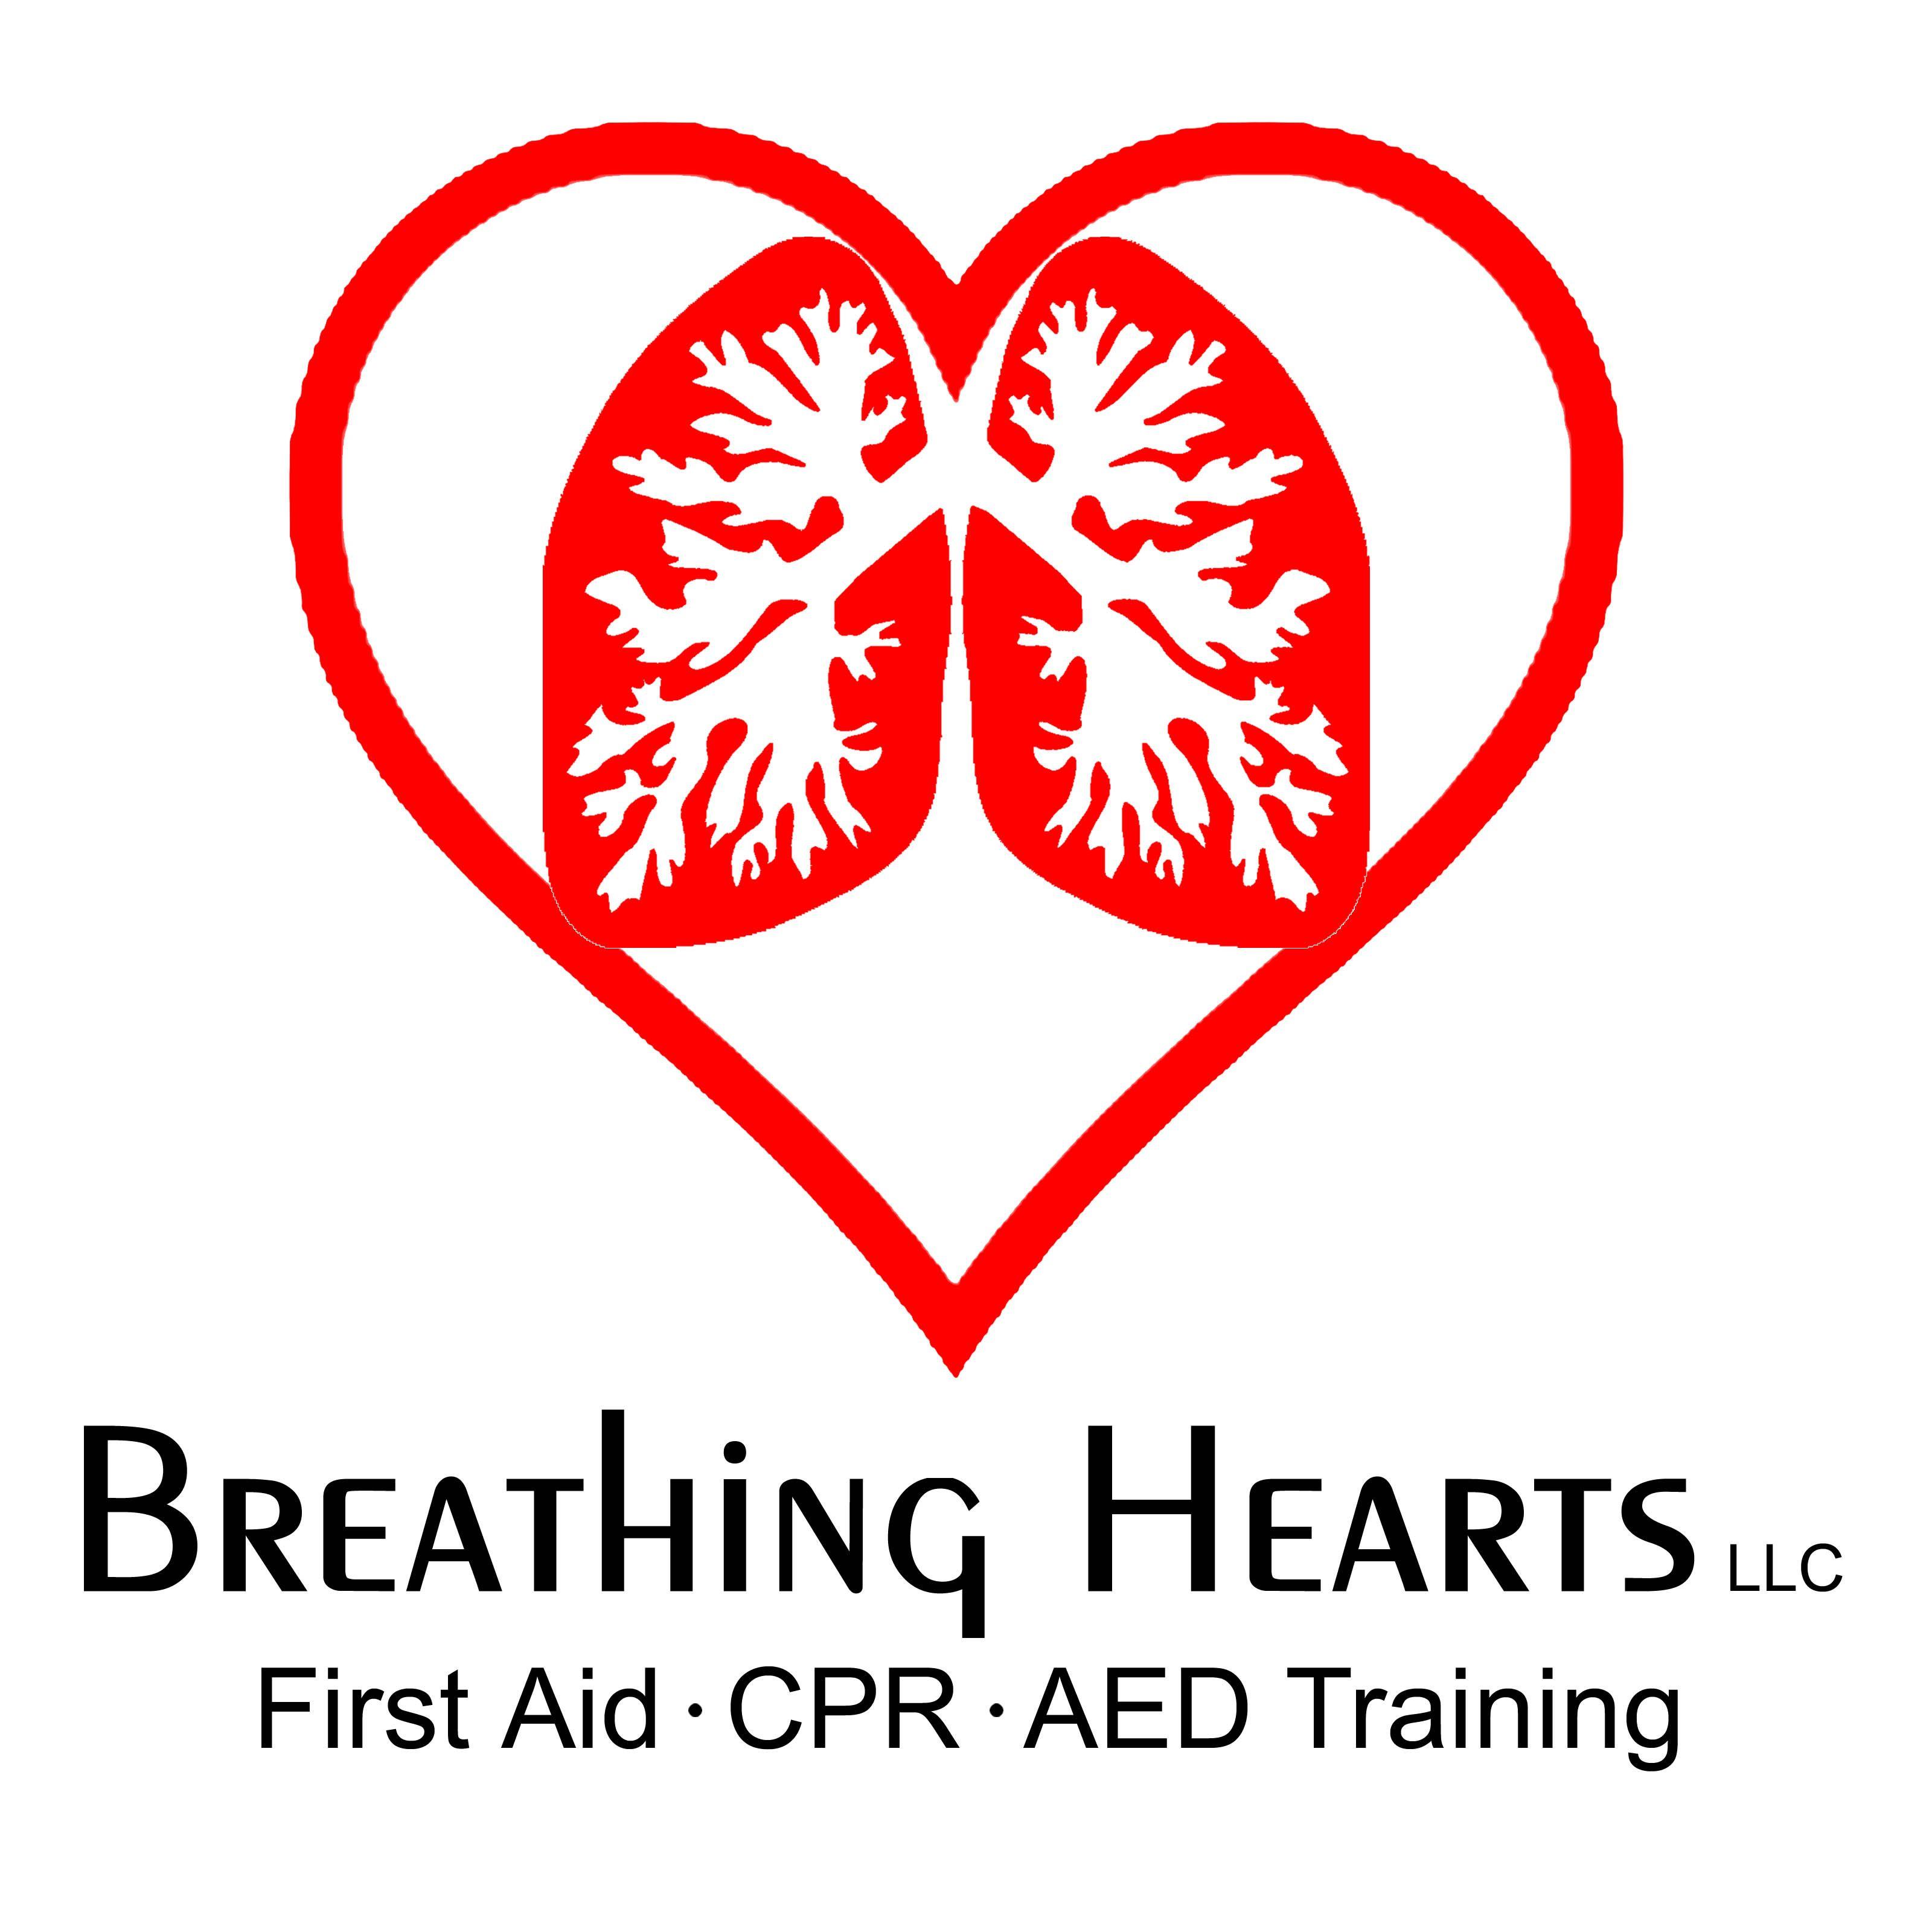 CPR Logo - Breathing Hearts, LLC – Mobile First Aid, CPR, AED Training